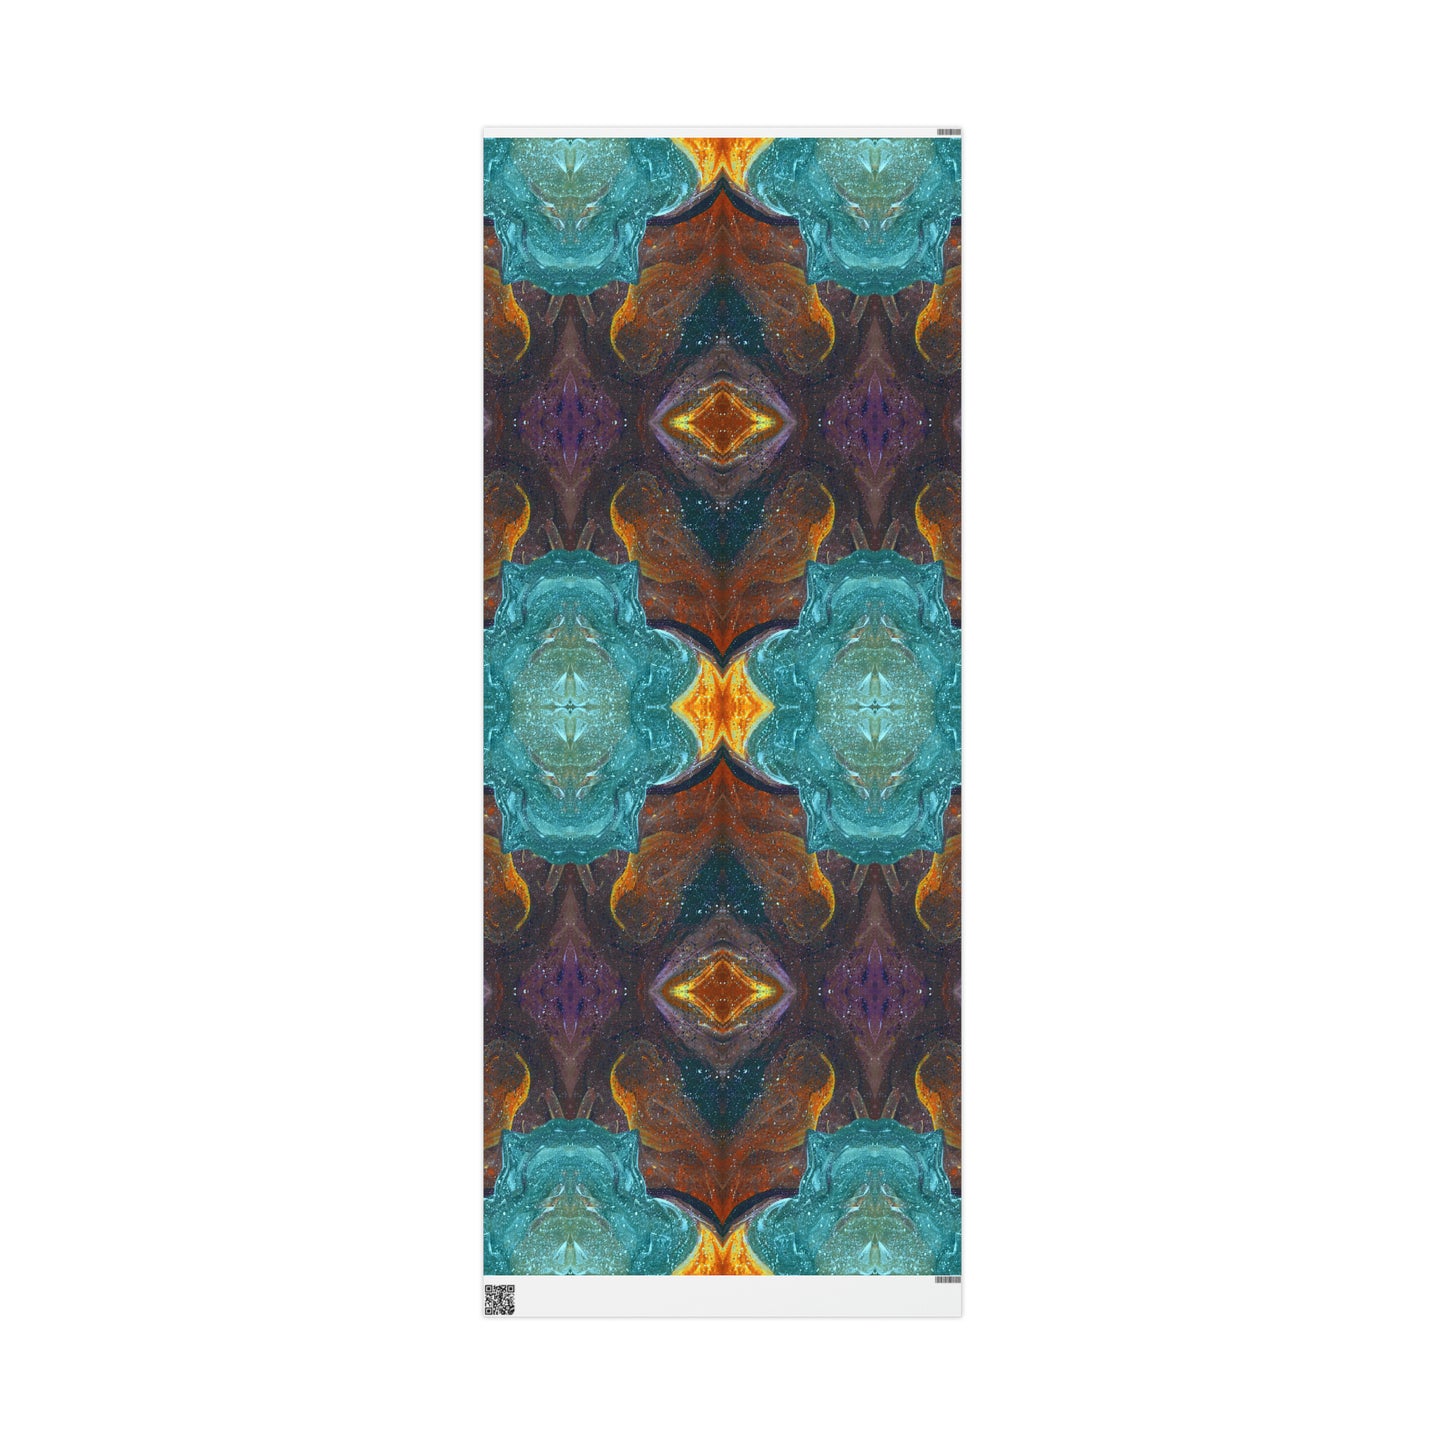 Symmetry of Life Wrapping Paper Roll (3 sizes)